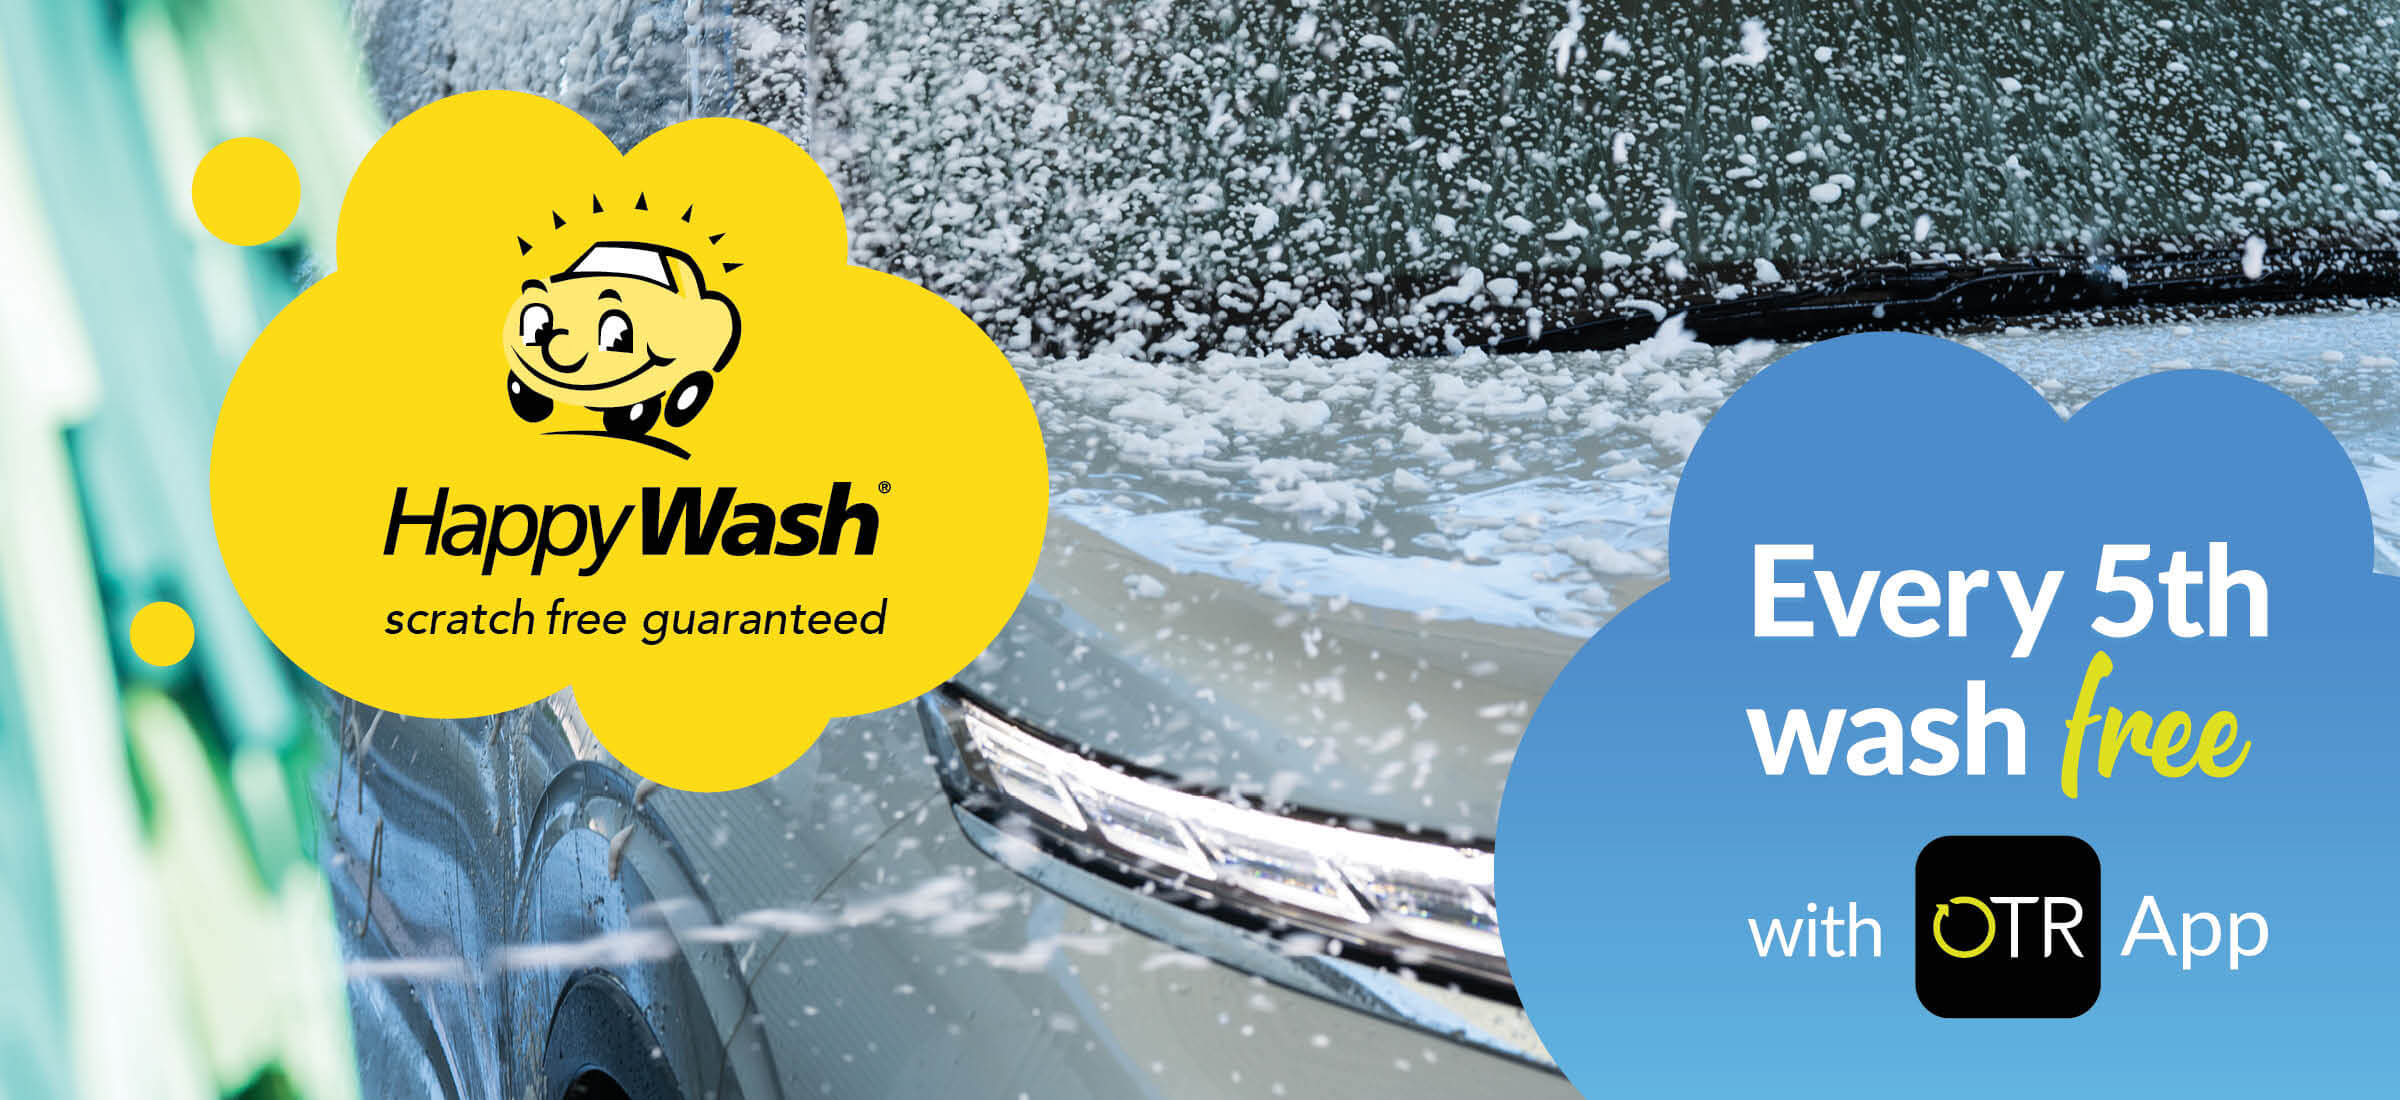 HappyWash every 5th wash is free with the OTR App